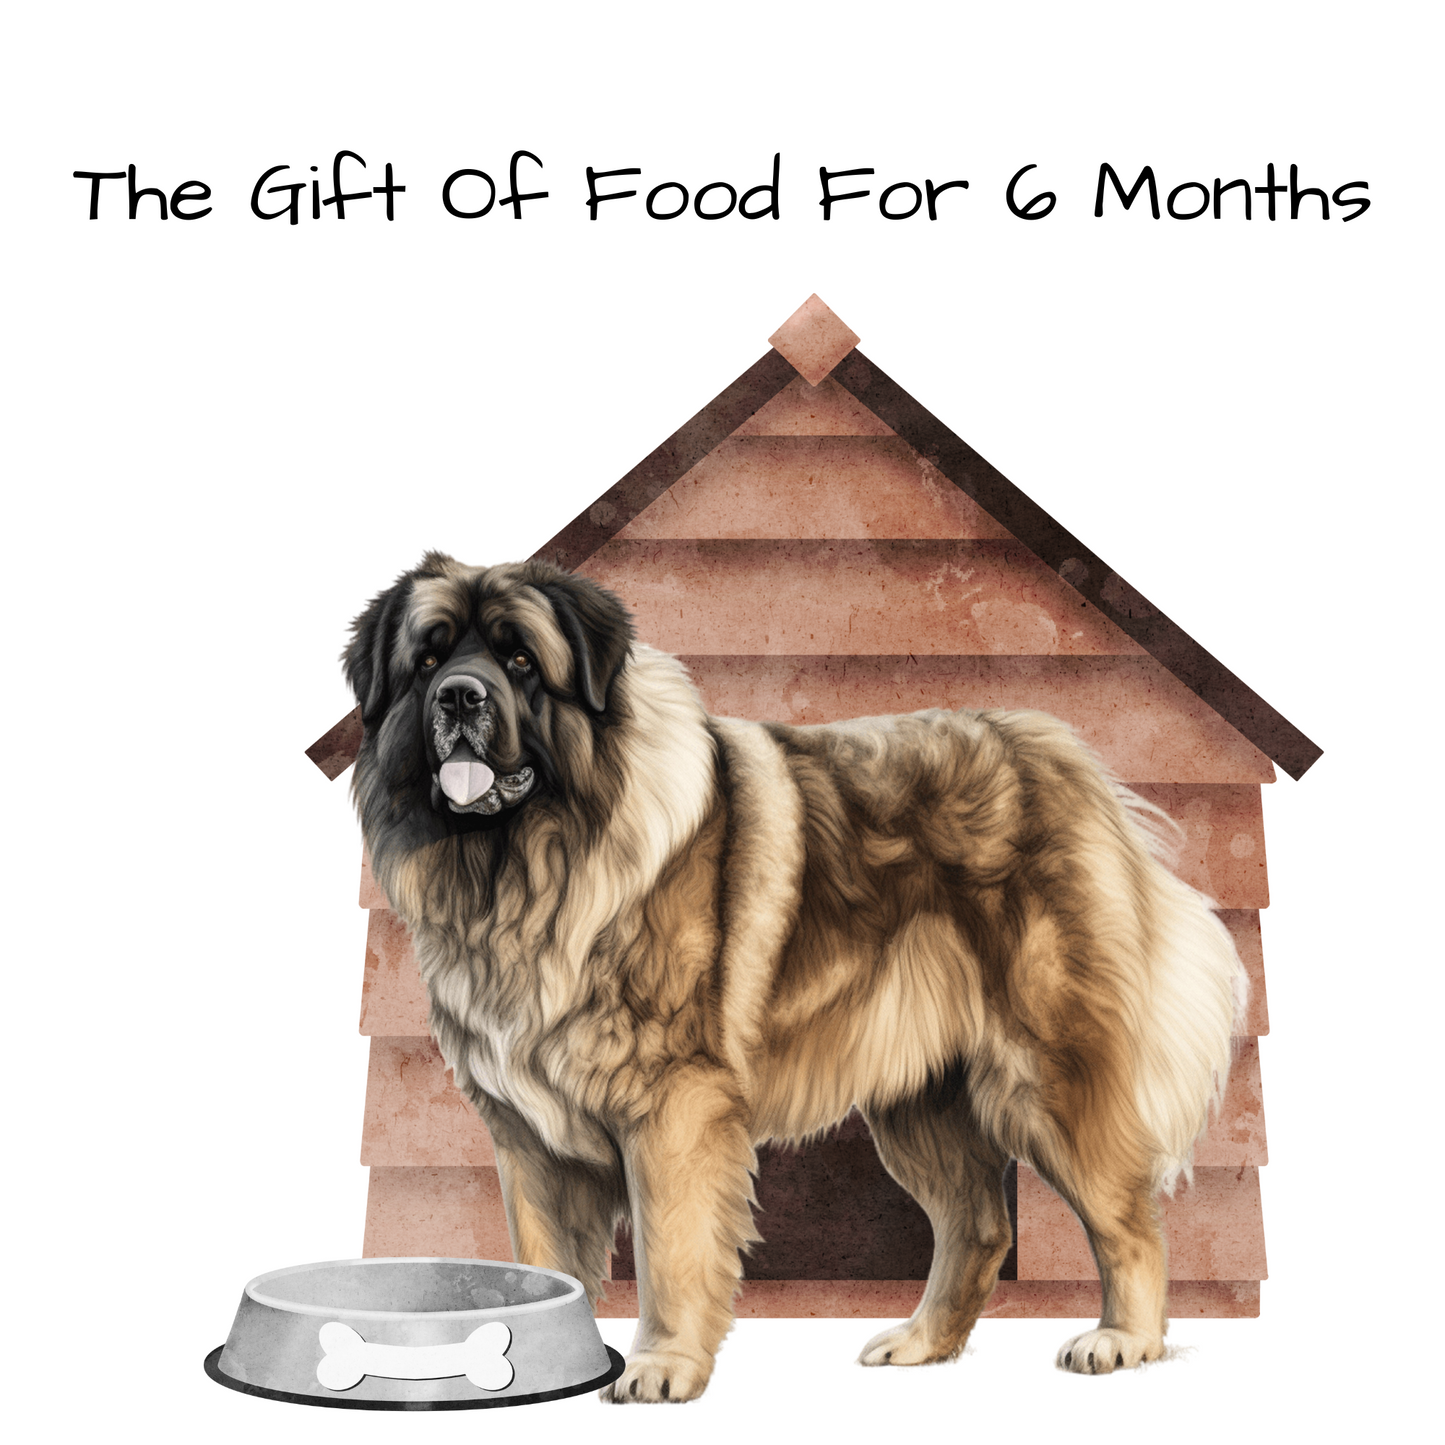 Feed A Dog For 6 Months Virtual Gift